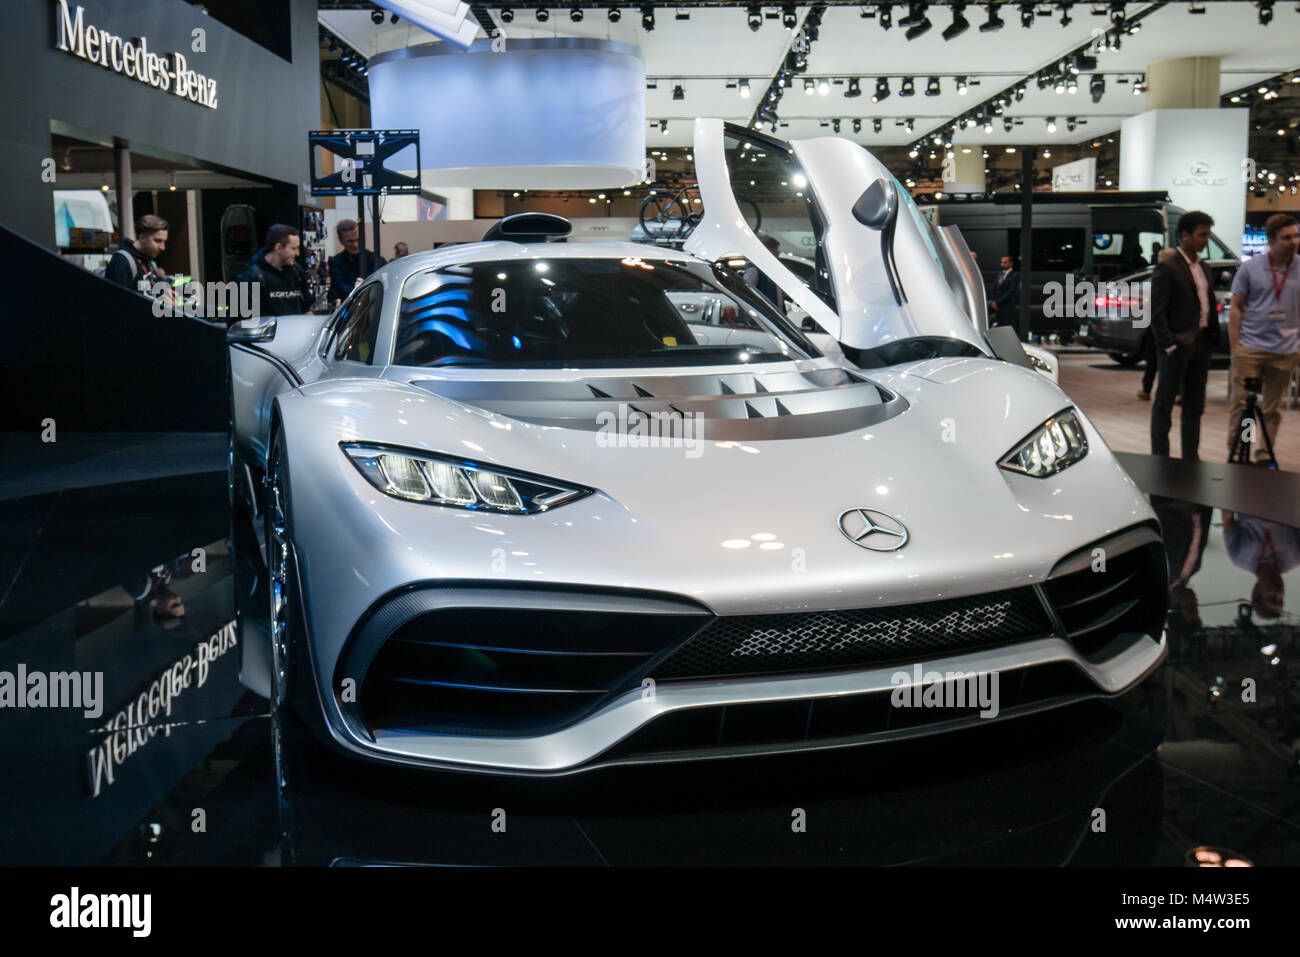 mercedes benz amg project one r50 concept car Stock Photo - Alamy